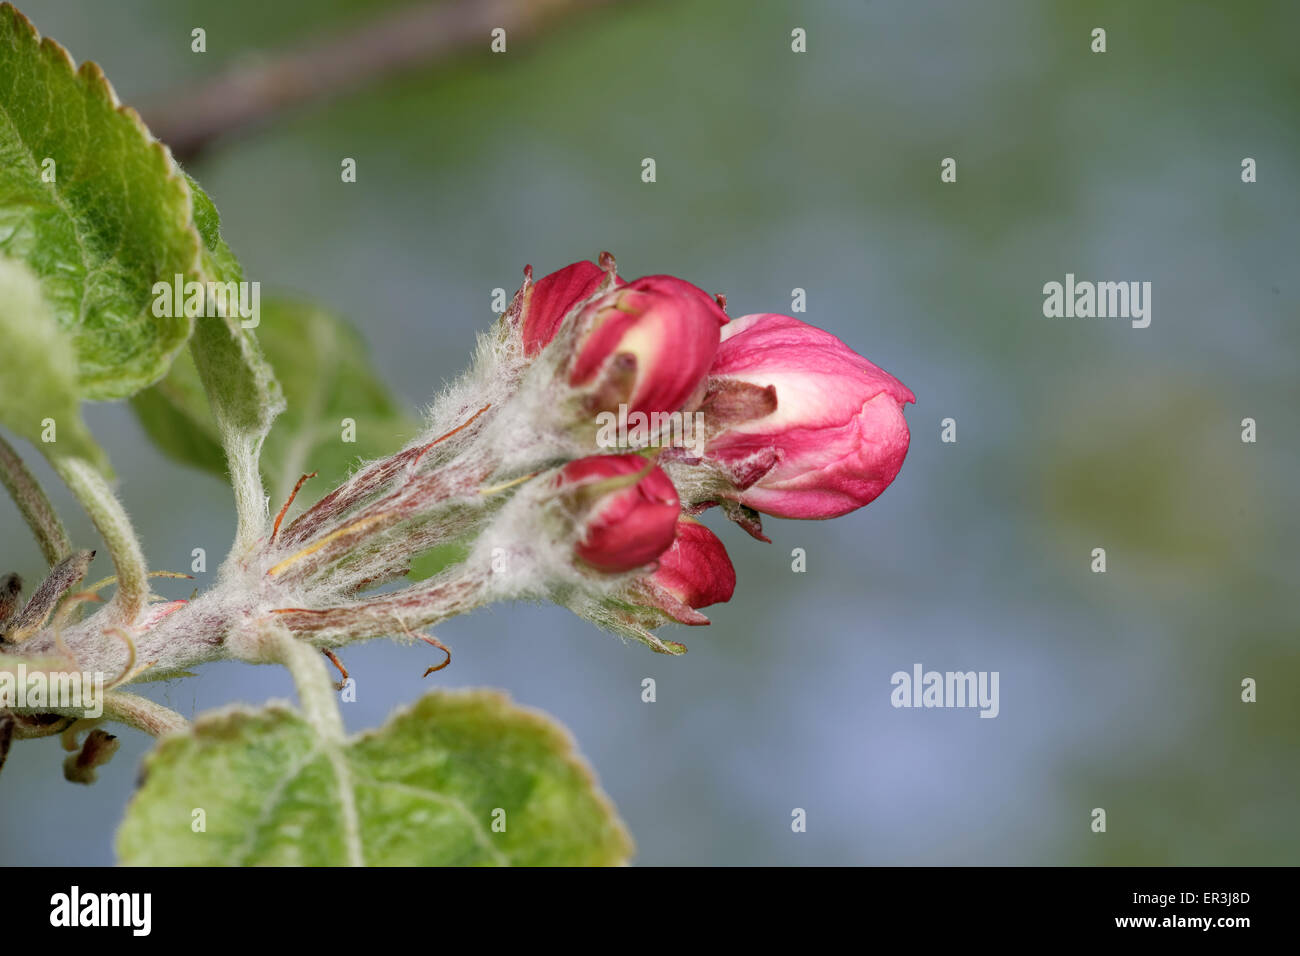 Flower buds of an old apple tree just before blooming. Stock Photo